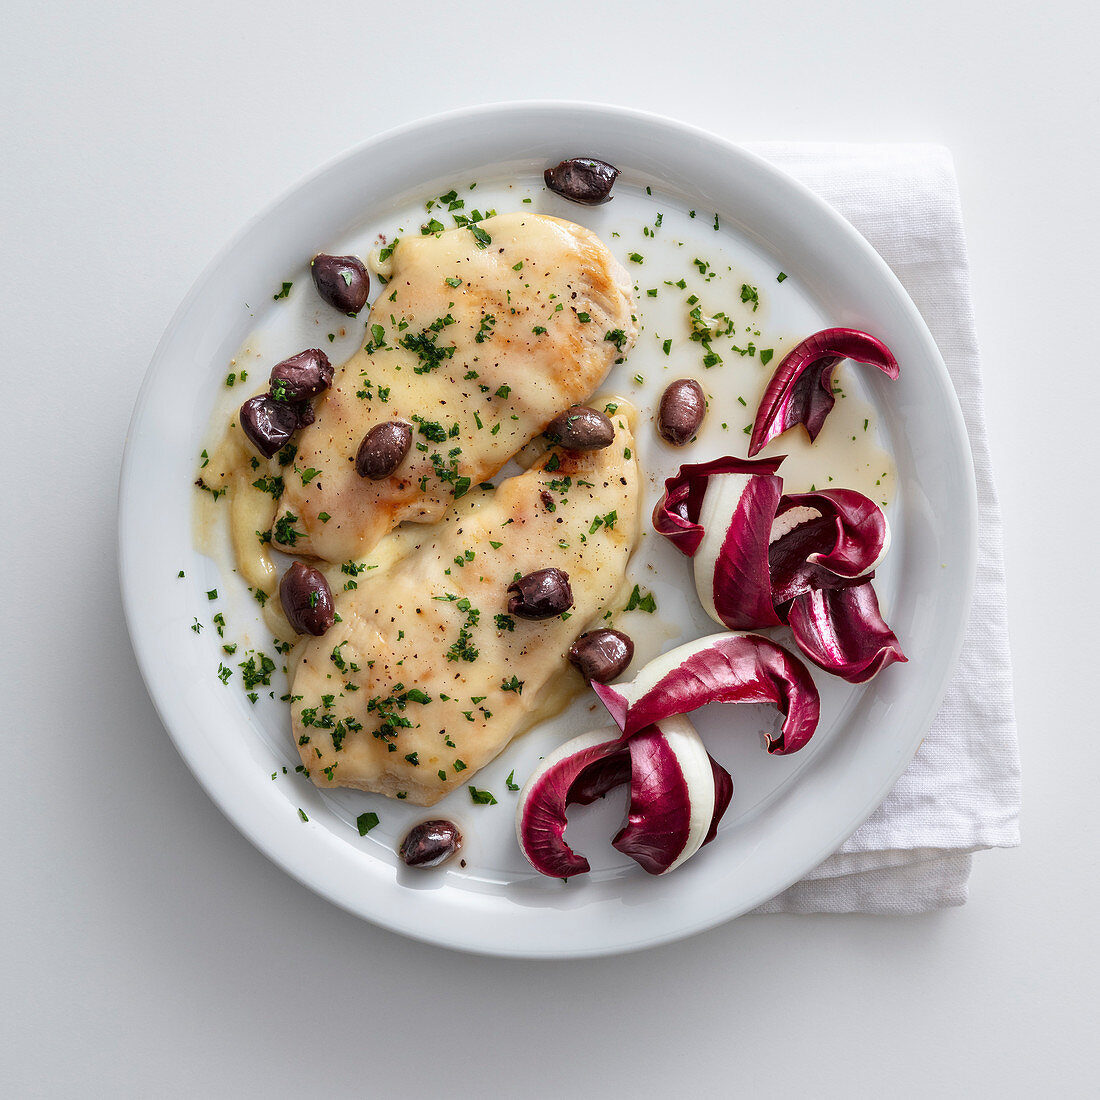 Chicken schnitzel with asiago and olives